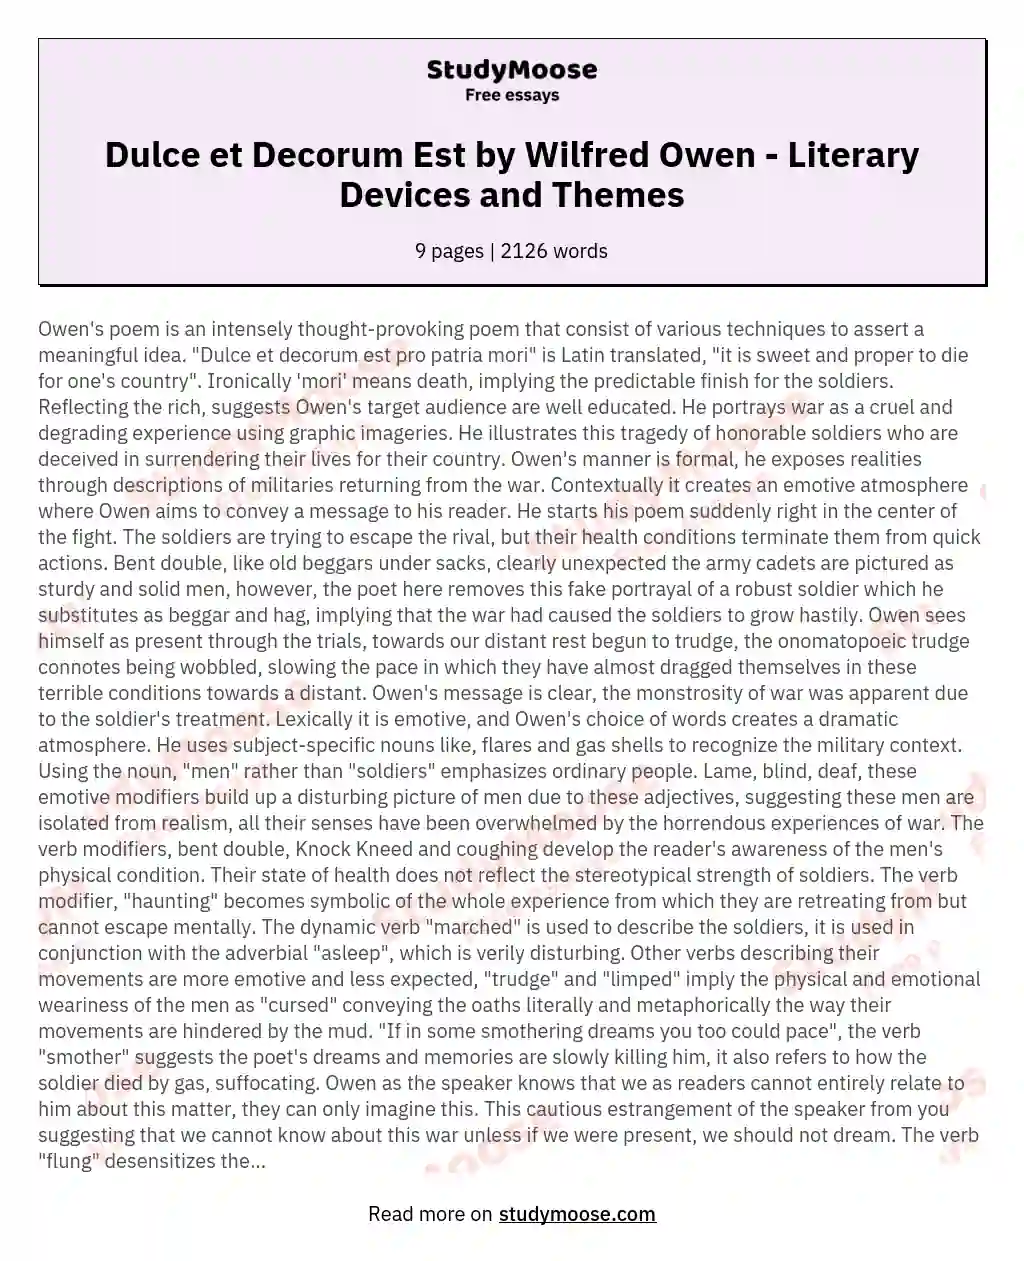 Dulce et Decorum Est by Wilfred Owen  - Literary Devices and Themes